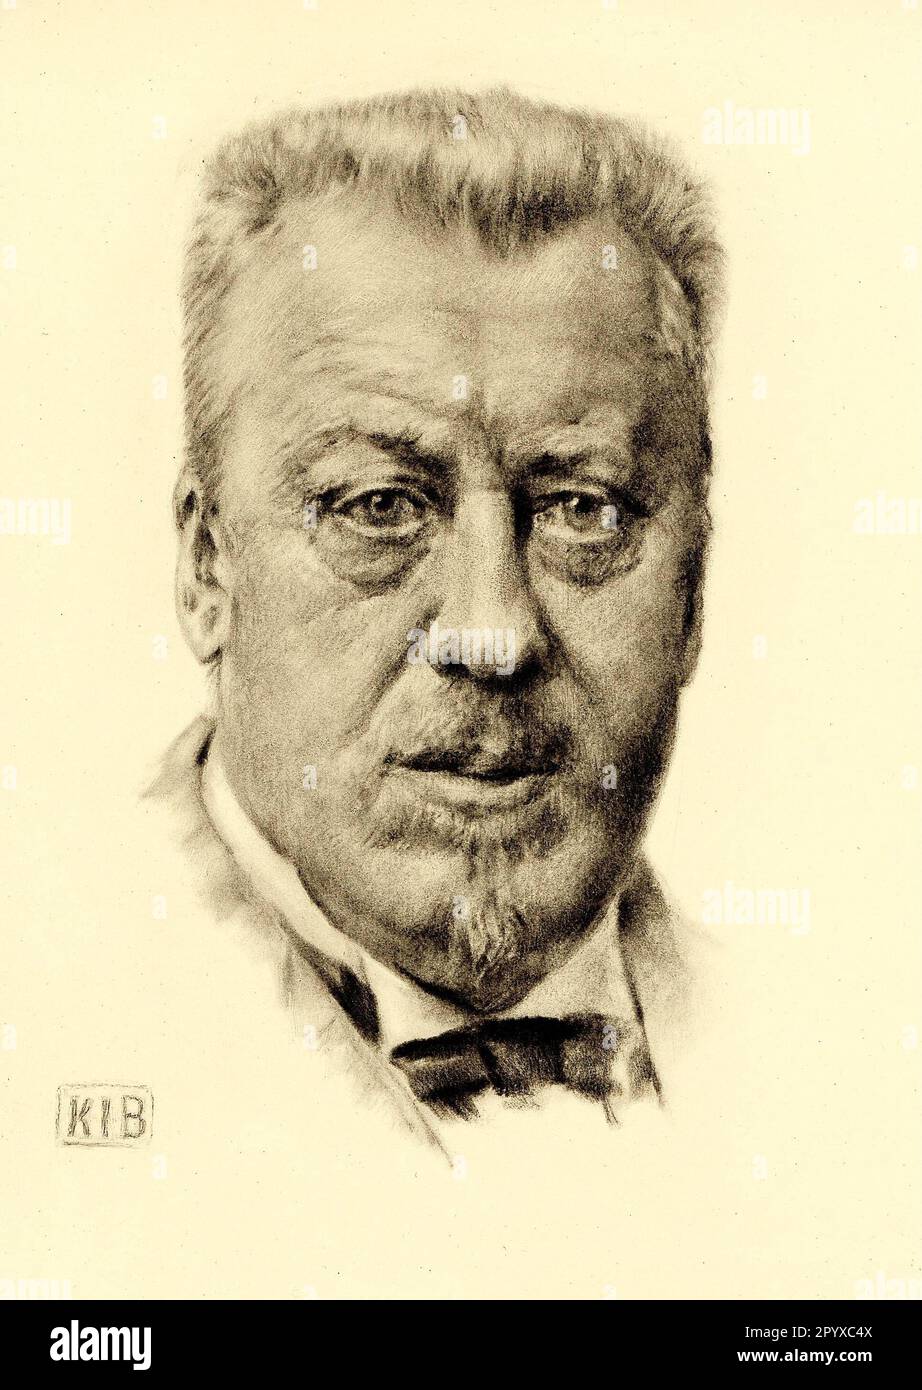 Dr. Hugo Eckener (1868-1954), German engineer and airship pioneer, chairman of the 'Luftschiffbau Zeppelin' society since April 1, 1924. In the same year he led the crossing of the Atlantic by the airship ZR III. drawing by K. J. Boehringer. Photo: Heliogravure, Corpus Imaginum, Hanfstaengl Collection. Undated photograph, probably taken in the 1930s. [automated translation] Stock Photo